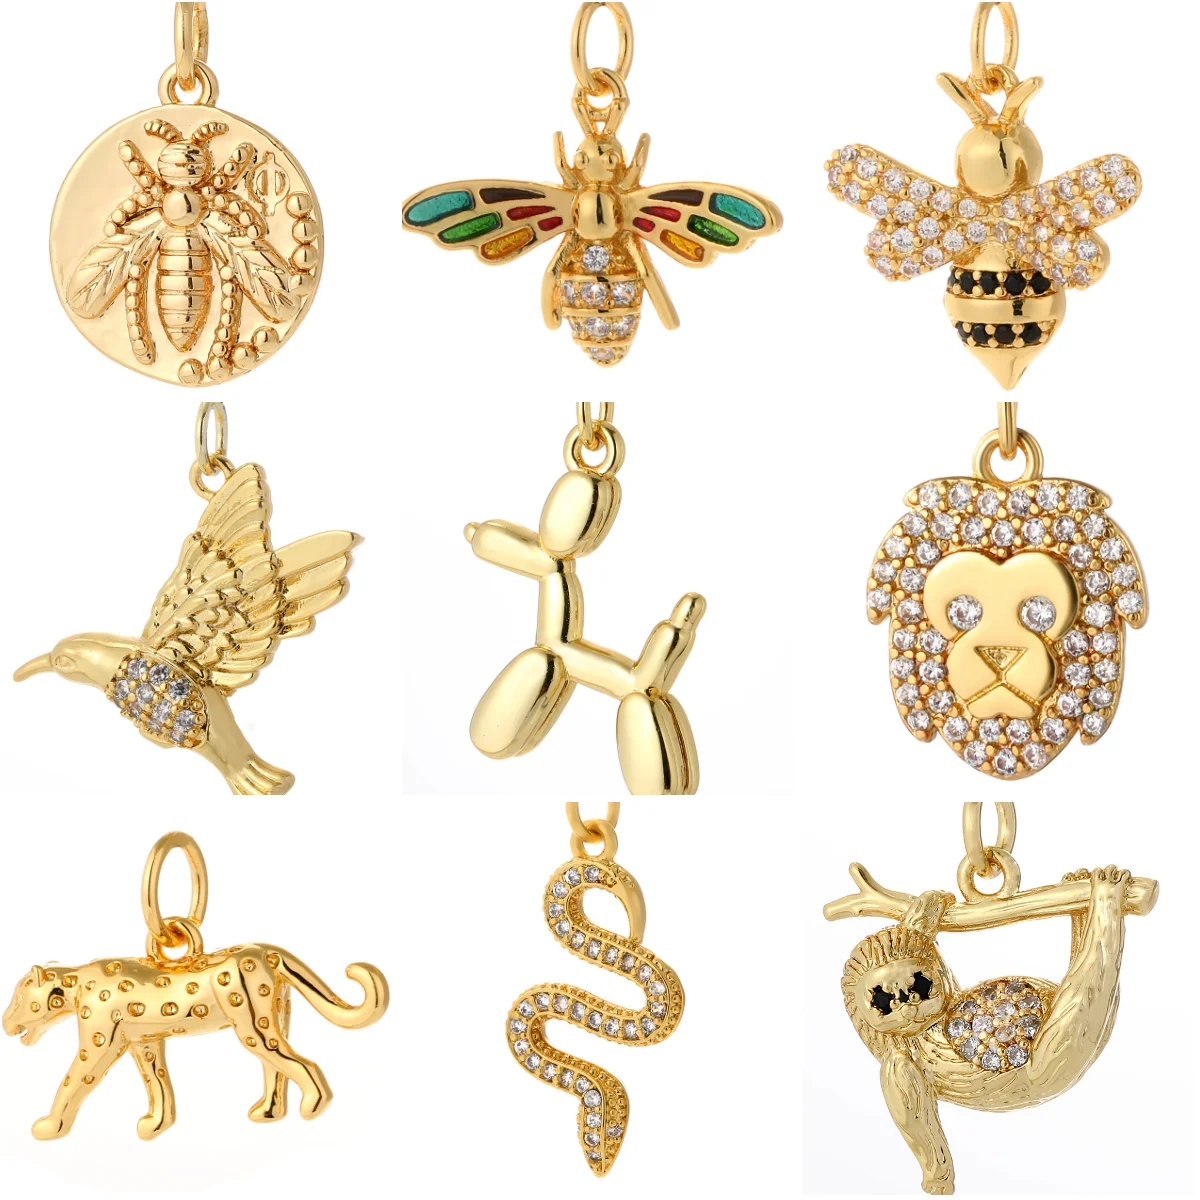 Gold Color Bee Snake Charms for Making Supplies Sloth Animals Designer Diy Charm Charms for Earrings Necklace Making CZ Zircon